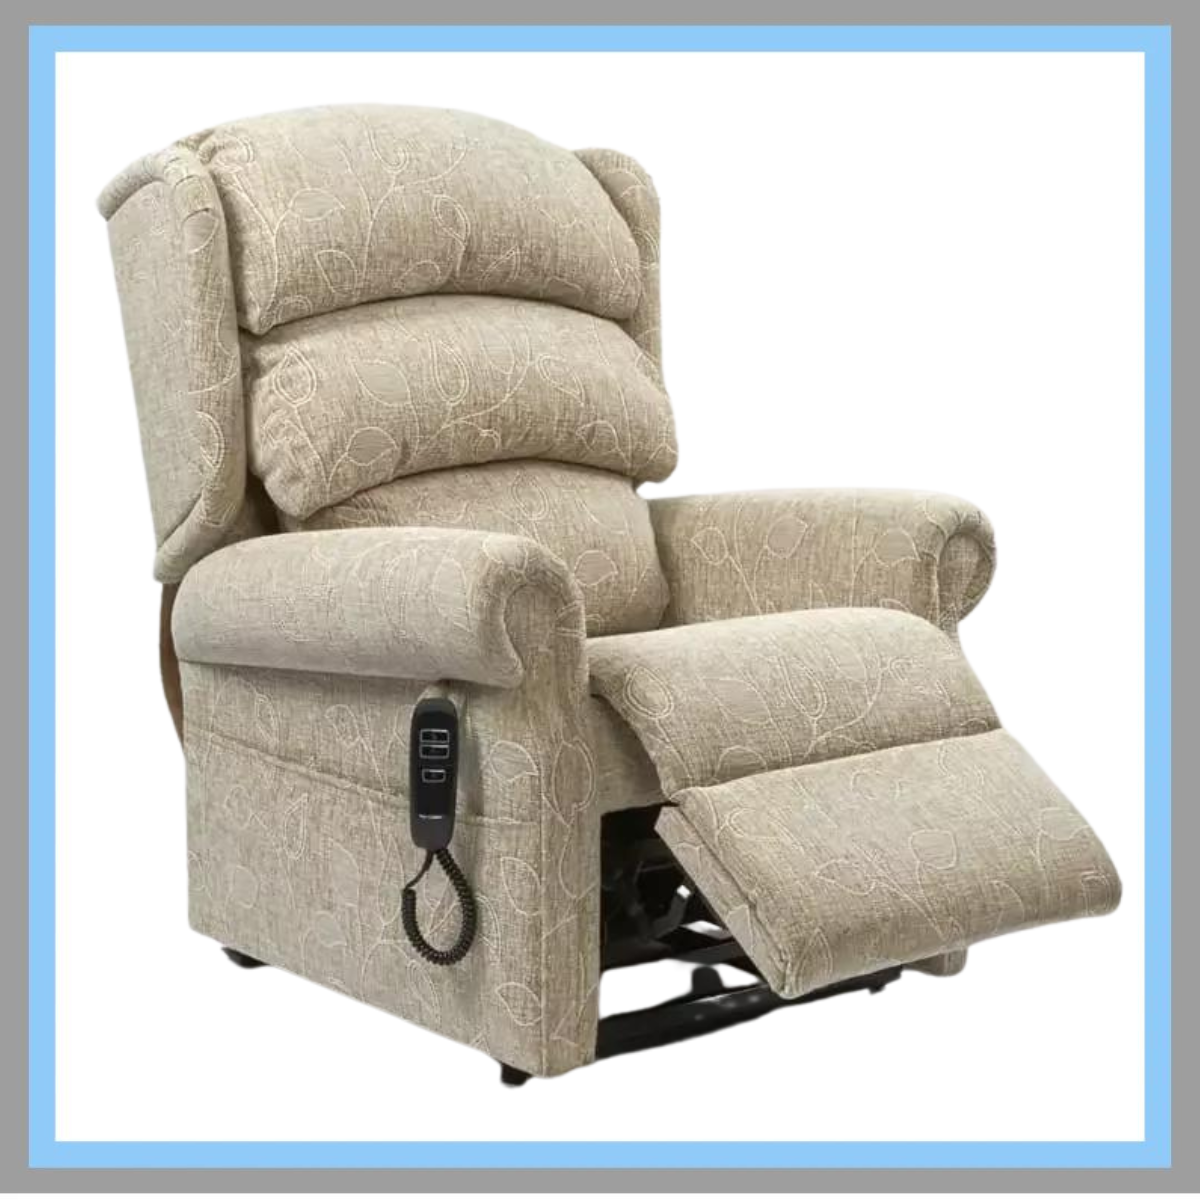 Riser recliner chair for comfortable seating 